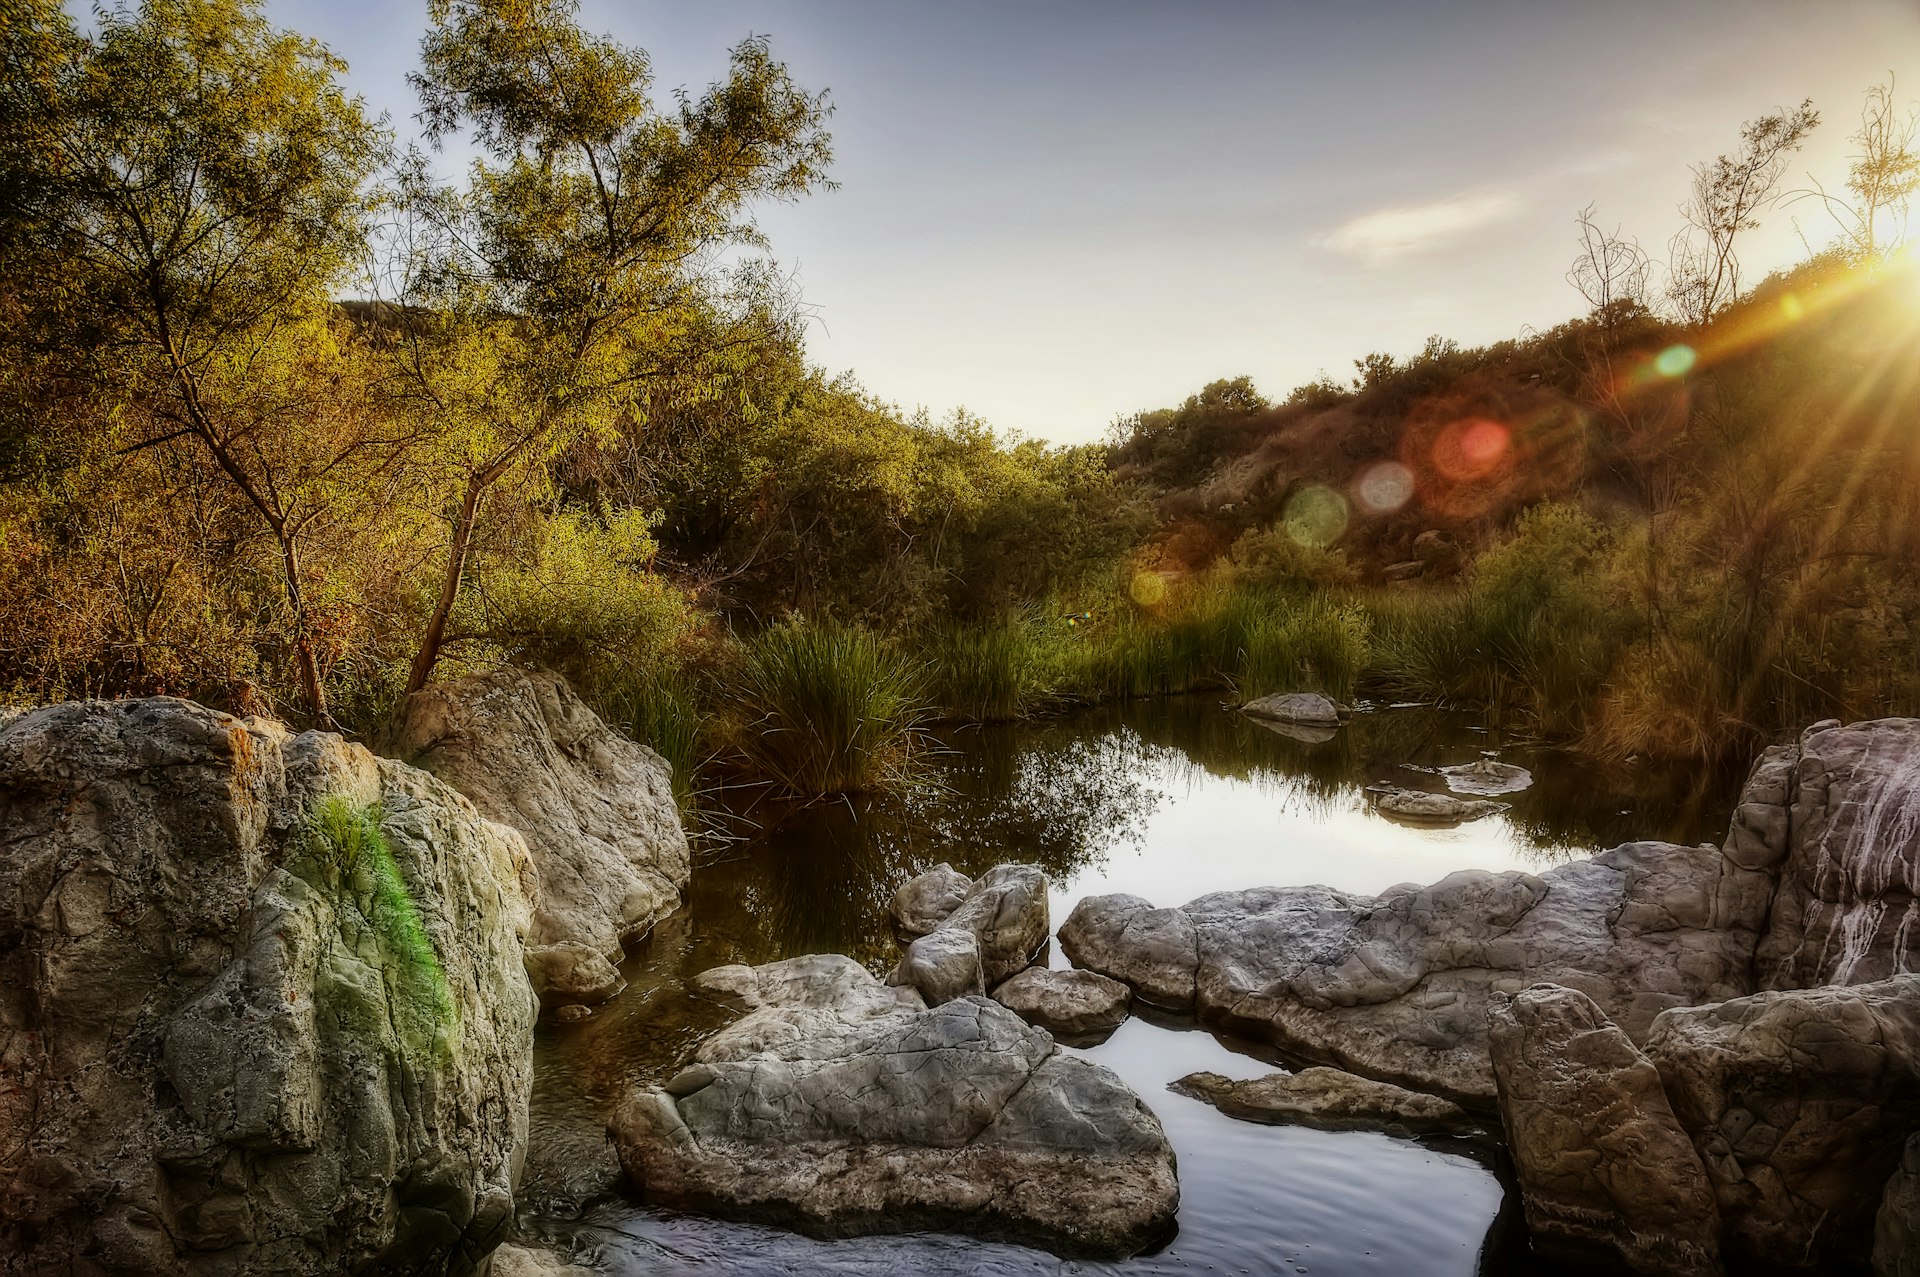 A waterhole surrounded by large boulders with a setting sun